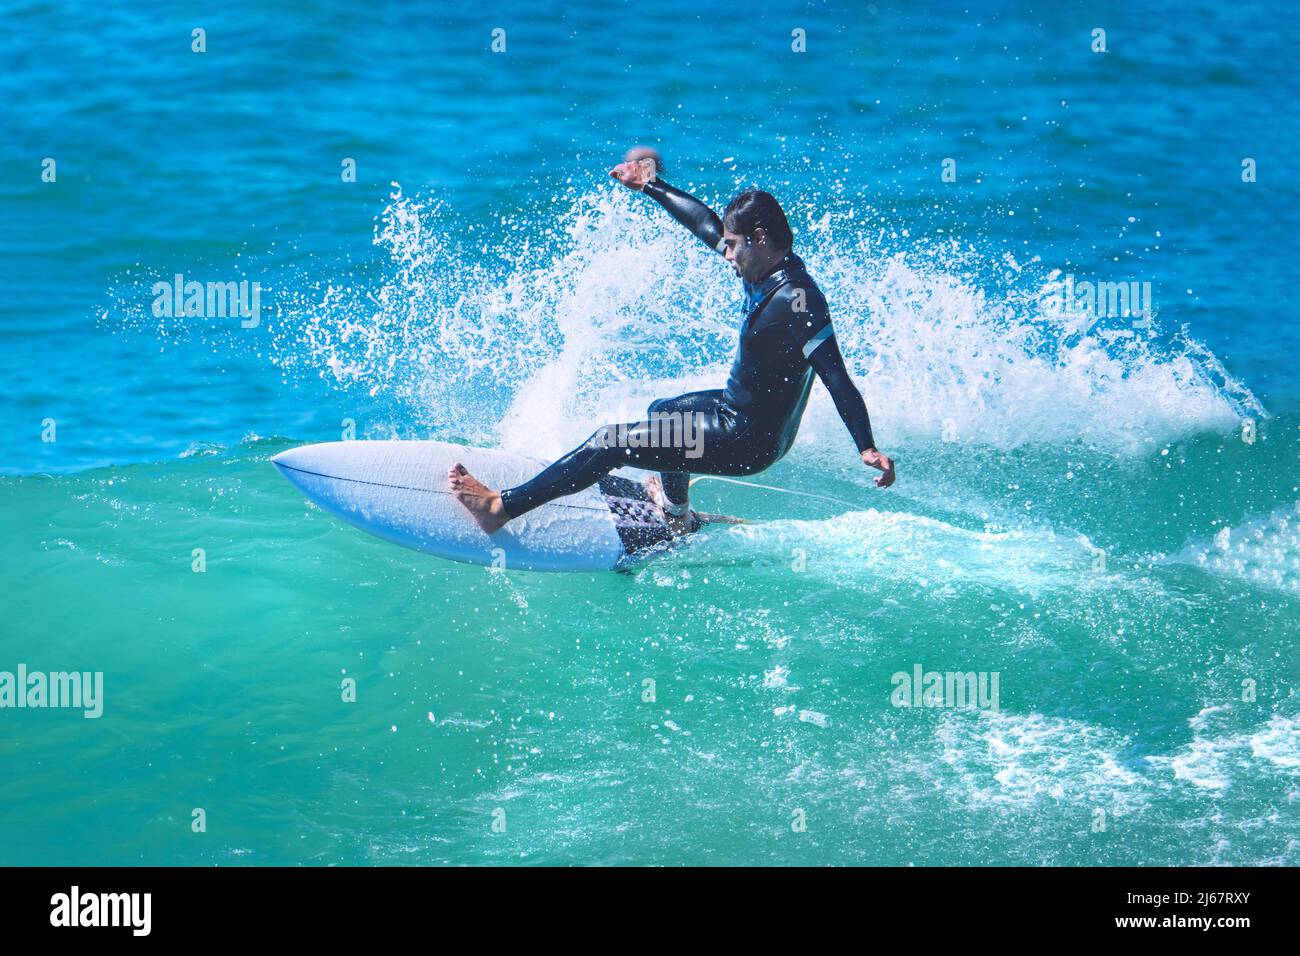 Surfer riding the wave on shortboard. Man catching waves in ocean. Water sports activity Stock Photo